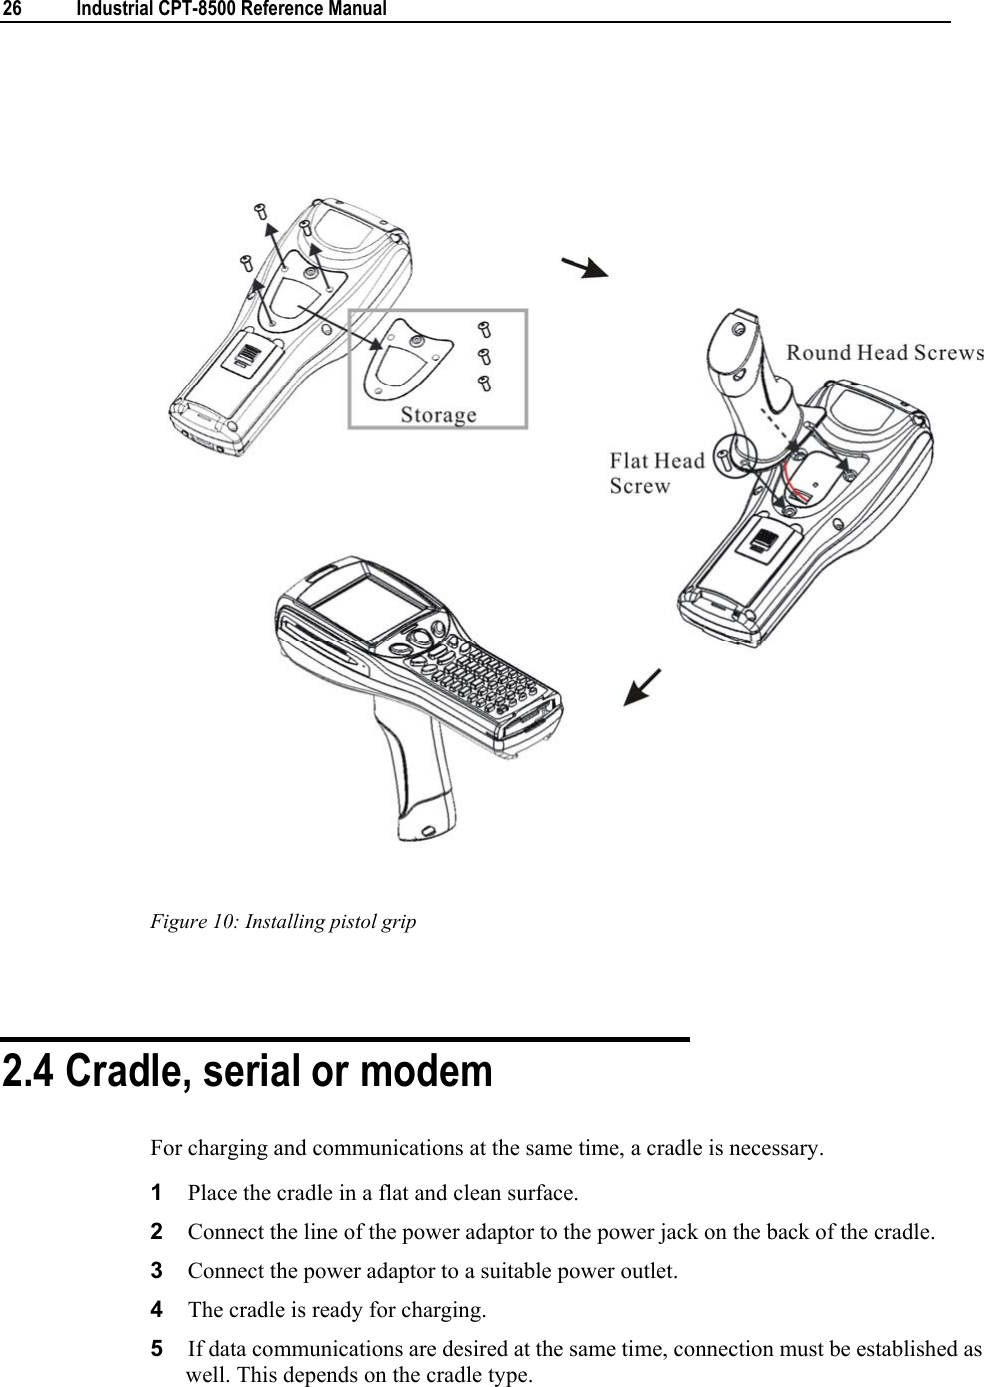  26  Industrial CPT-8500 Reference Manual    Figure 10: Installing pistol grip   2.4 Cradle, serial or modem For charging and communications at the same time, a cradle is necessary. 1  Place the cradle in a flat and clean surface. 2  Connect the line of the power adaptor to the power jack on the back of the cradle. 3  Connect the power adaptor to a suitable power outlet. 4  The cradle is ready for charging. 5  If data communications are desired at the same time, connection must be established as well. This depends on the cradle type.  